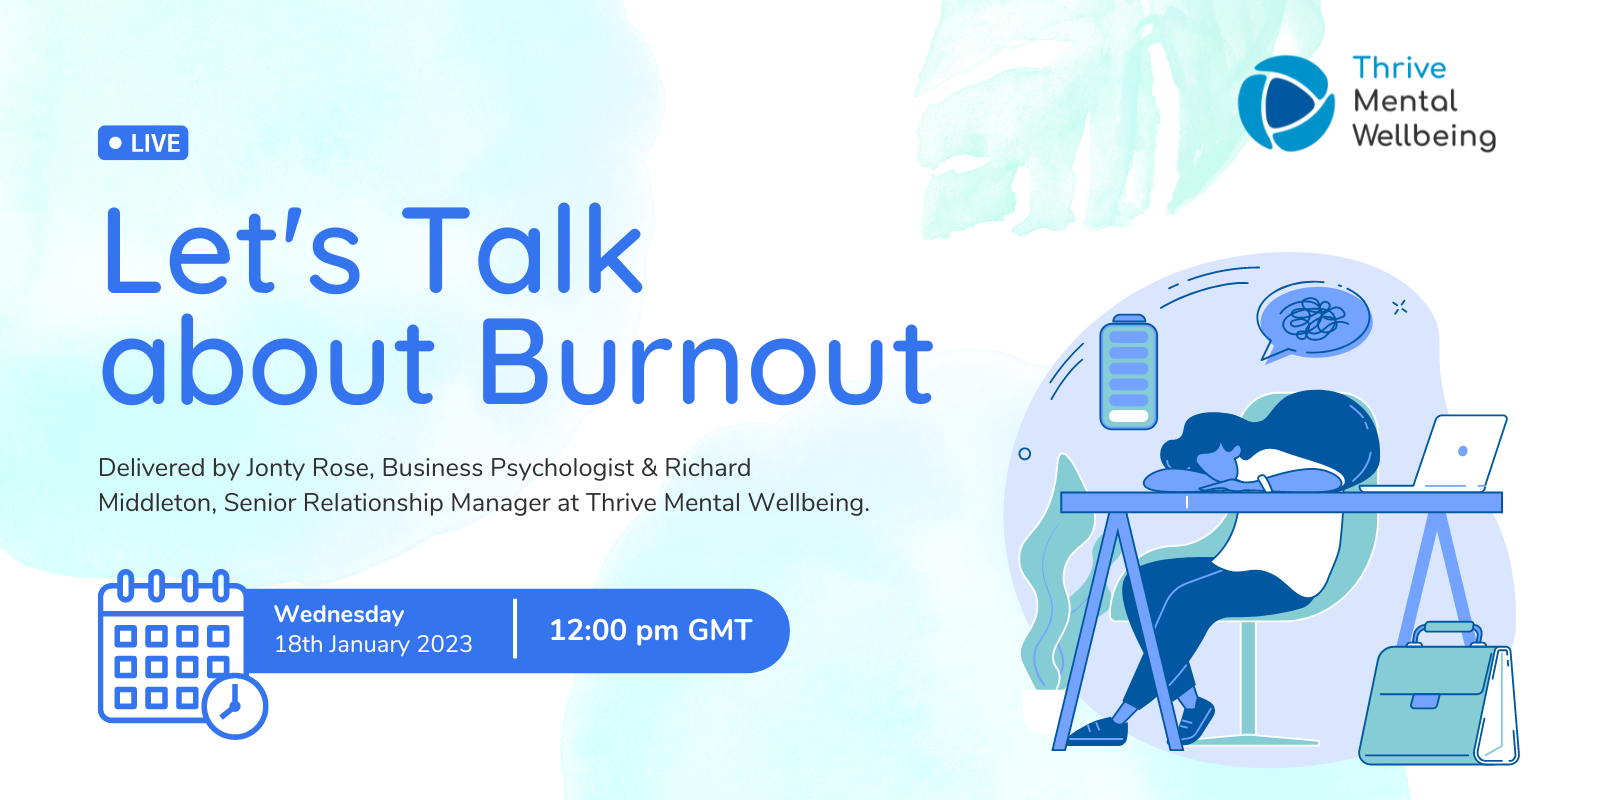 Let's Talk about Burnout Webinar - Sign up by completing the form below.